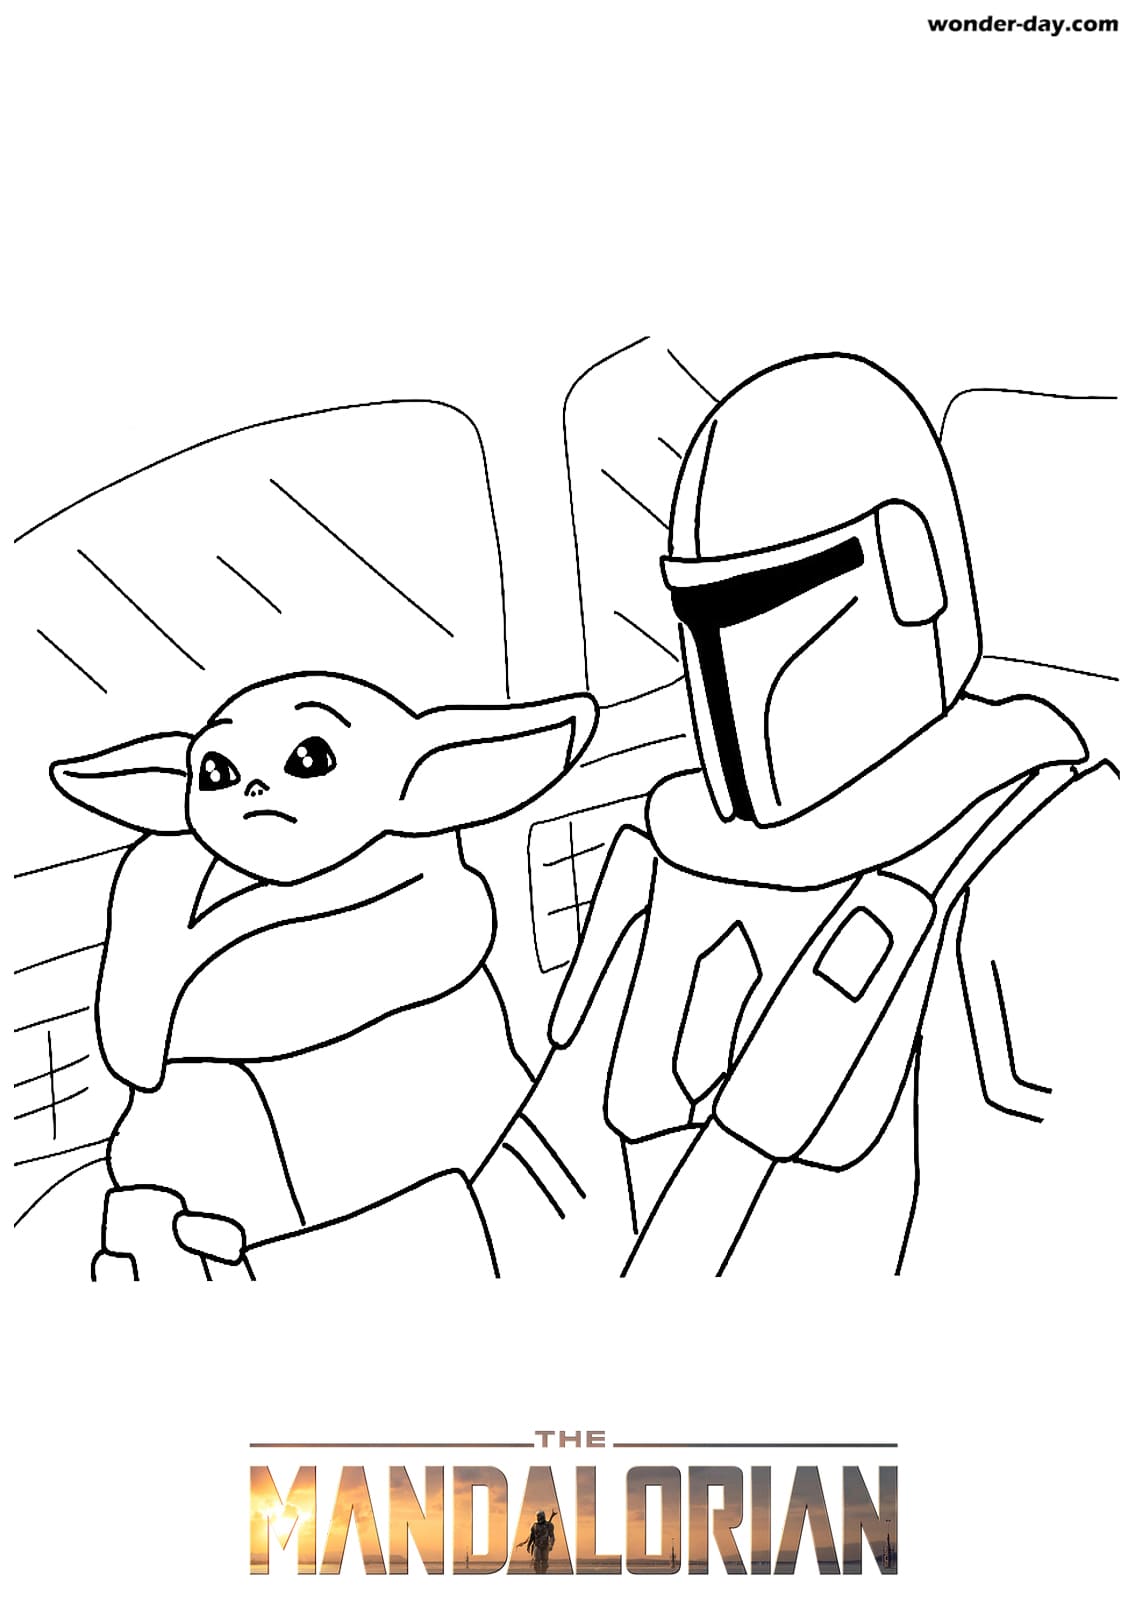 Baby Yoda Coloring Pages Free Printable   WONDER DAY — Coloring ...